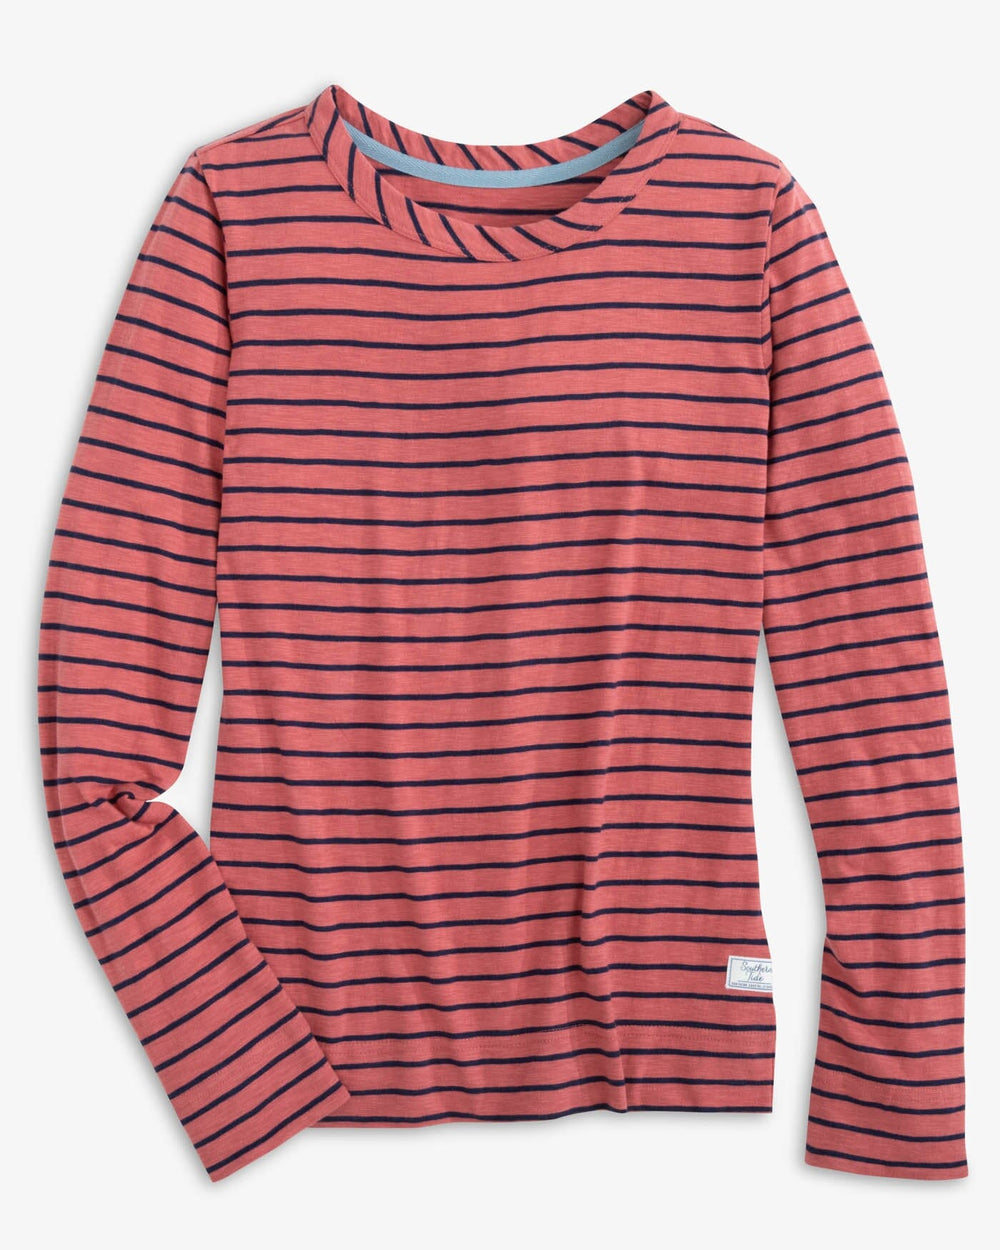 The front view of the Southern Tide Kimmy Stripe Crew Neck Long Sleeve T-Shirt by Southern Tide - Dusty Coral